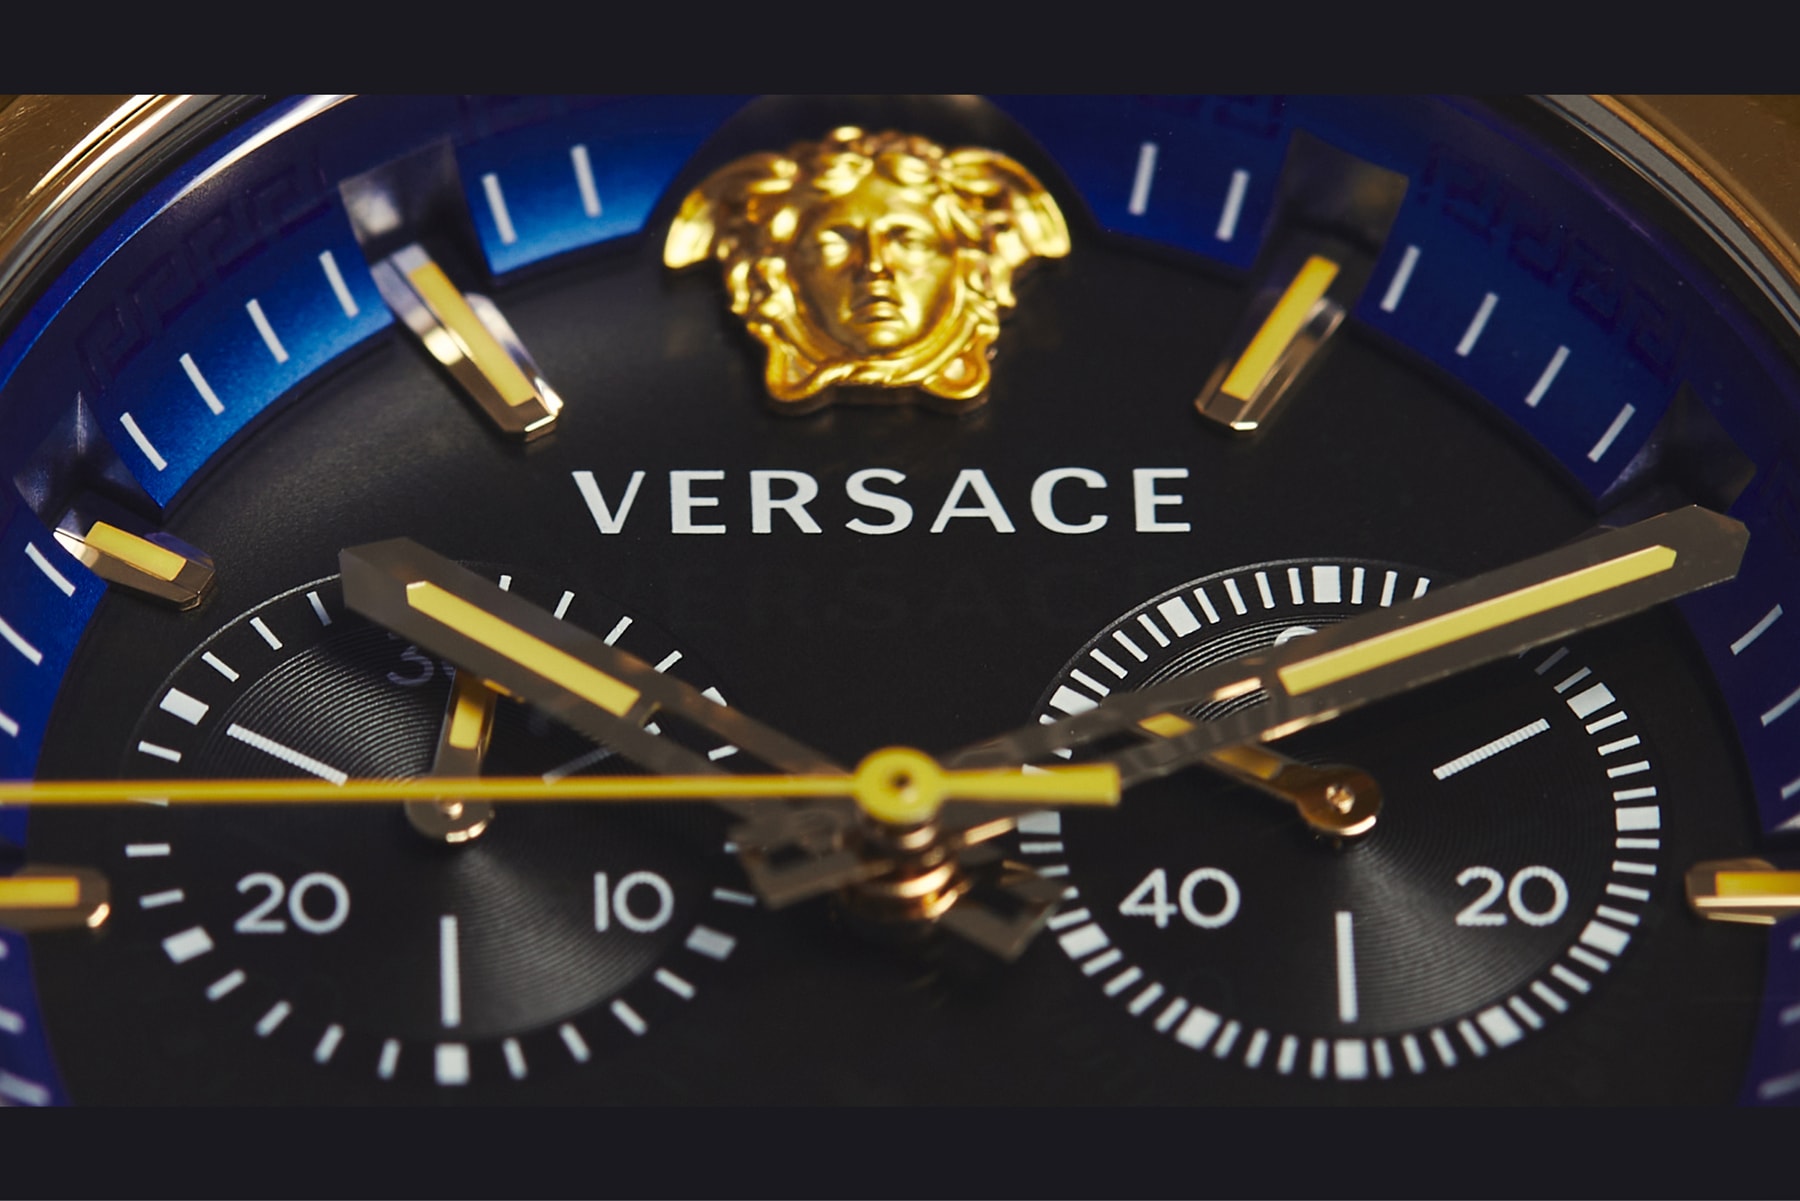 versace Donatella Versace avant garde classic designs, sophisticated functionalities, richer details and flawless personal style all-new Versace Icon Active chronograph watch street culture references and a sporty, minimalistic design Greek key metal loop Medusa that sits at 12h Greek key Greca motif inner ring IP champagne transparent polycarbonate opulent